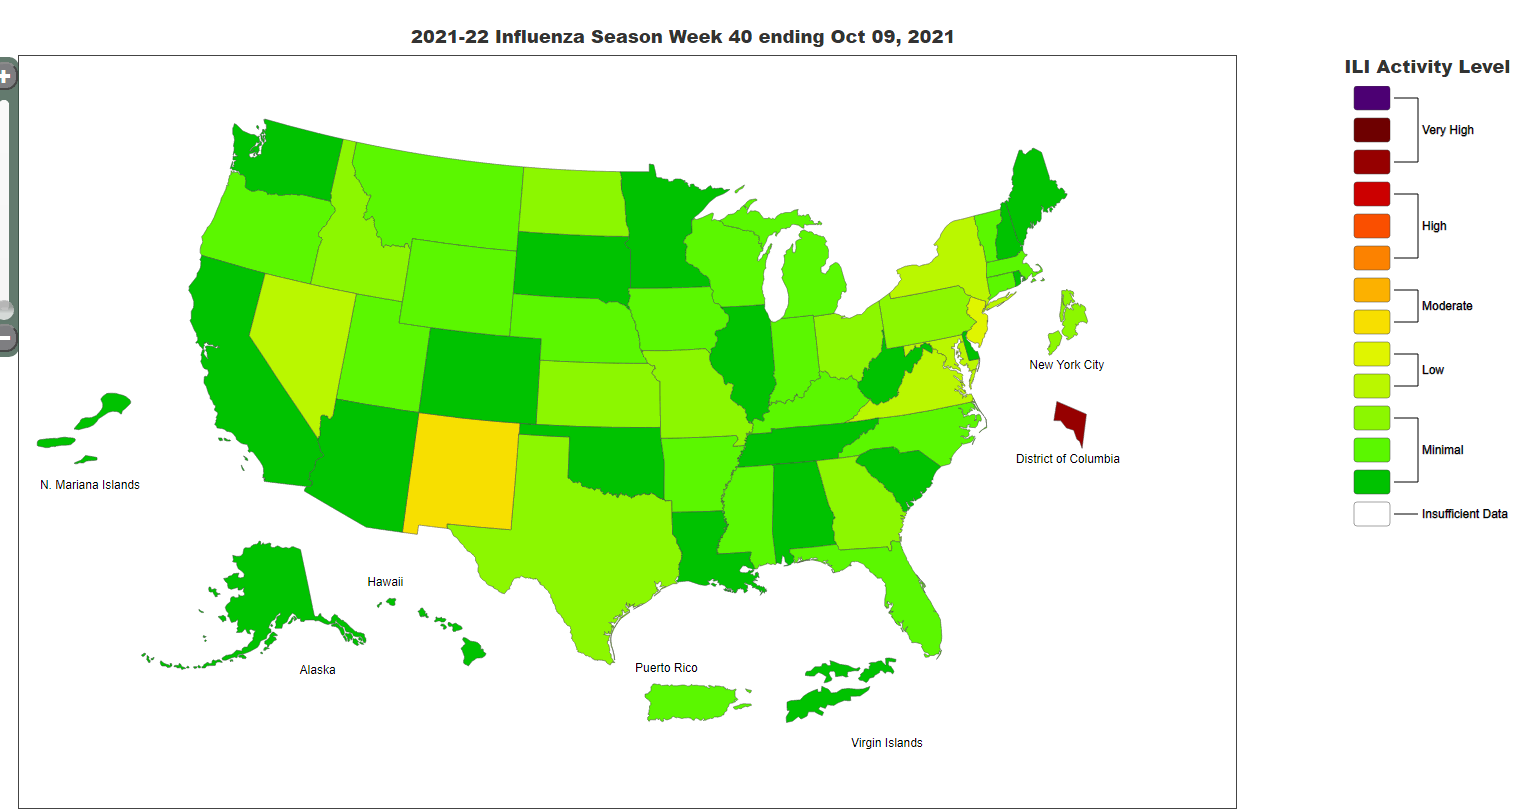 Colored chart of seasonal influenza activity in the U.S.A